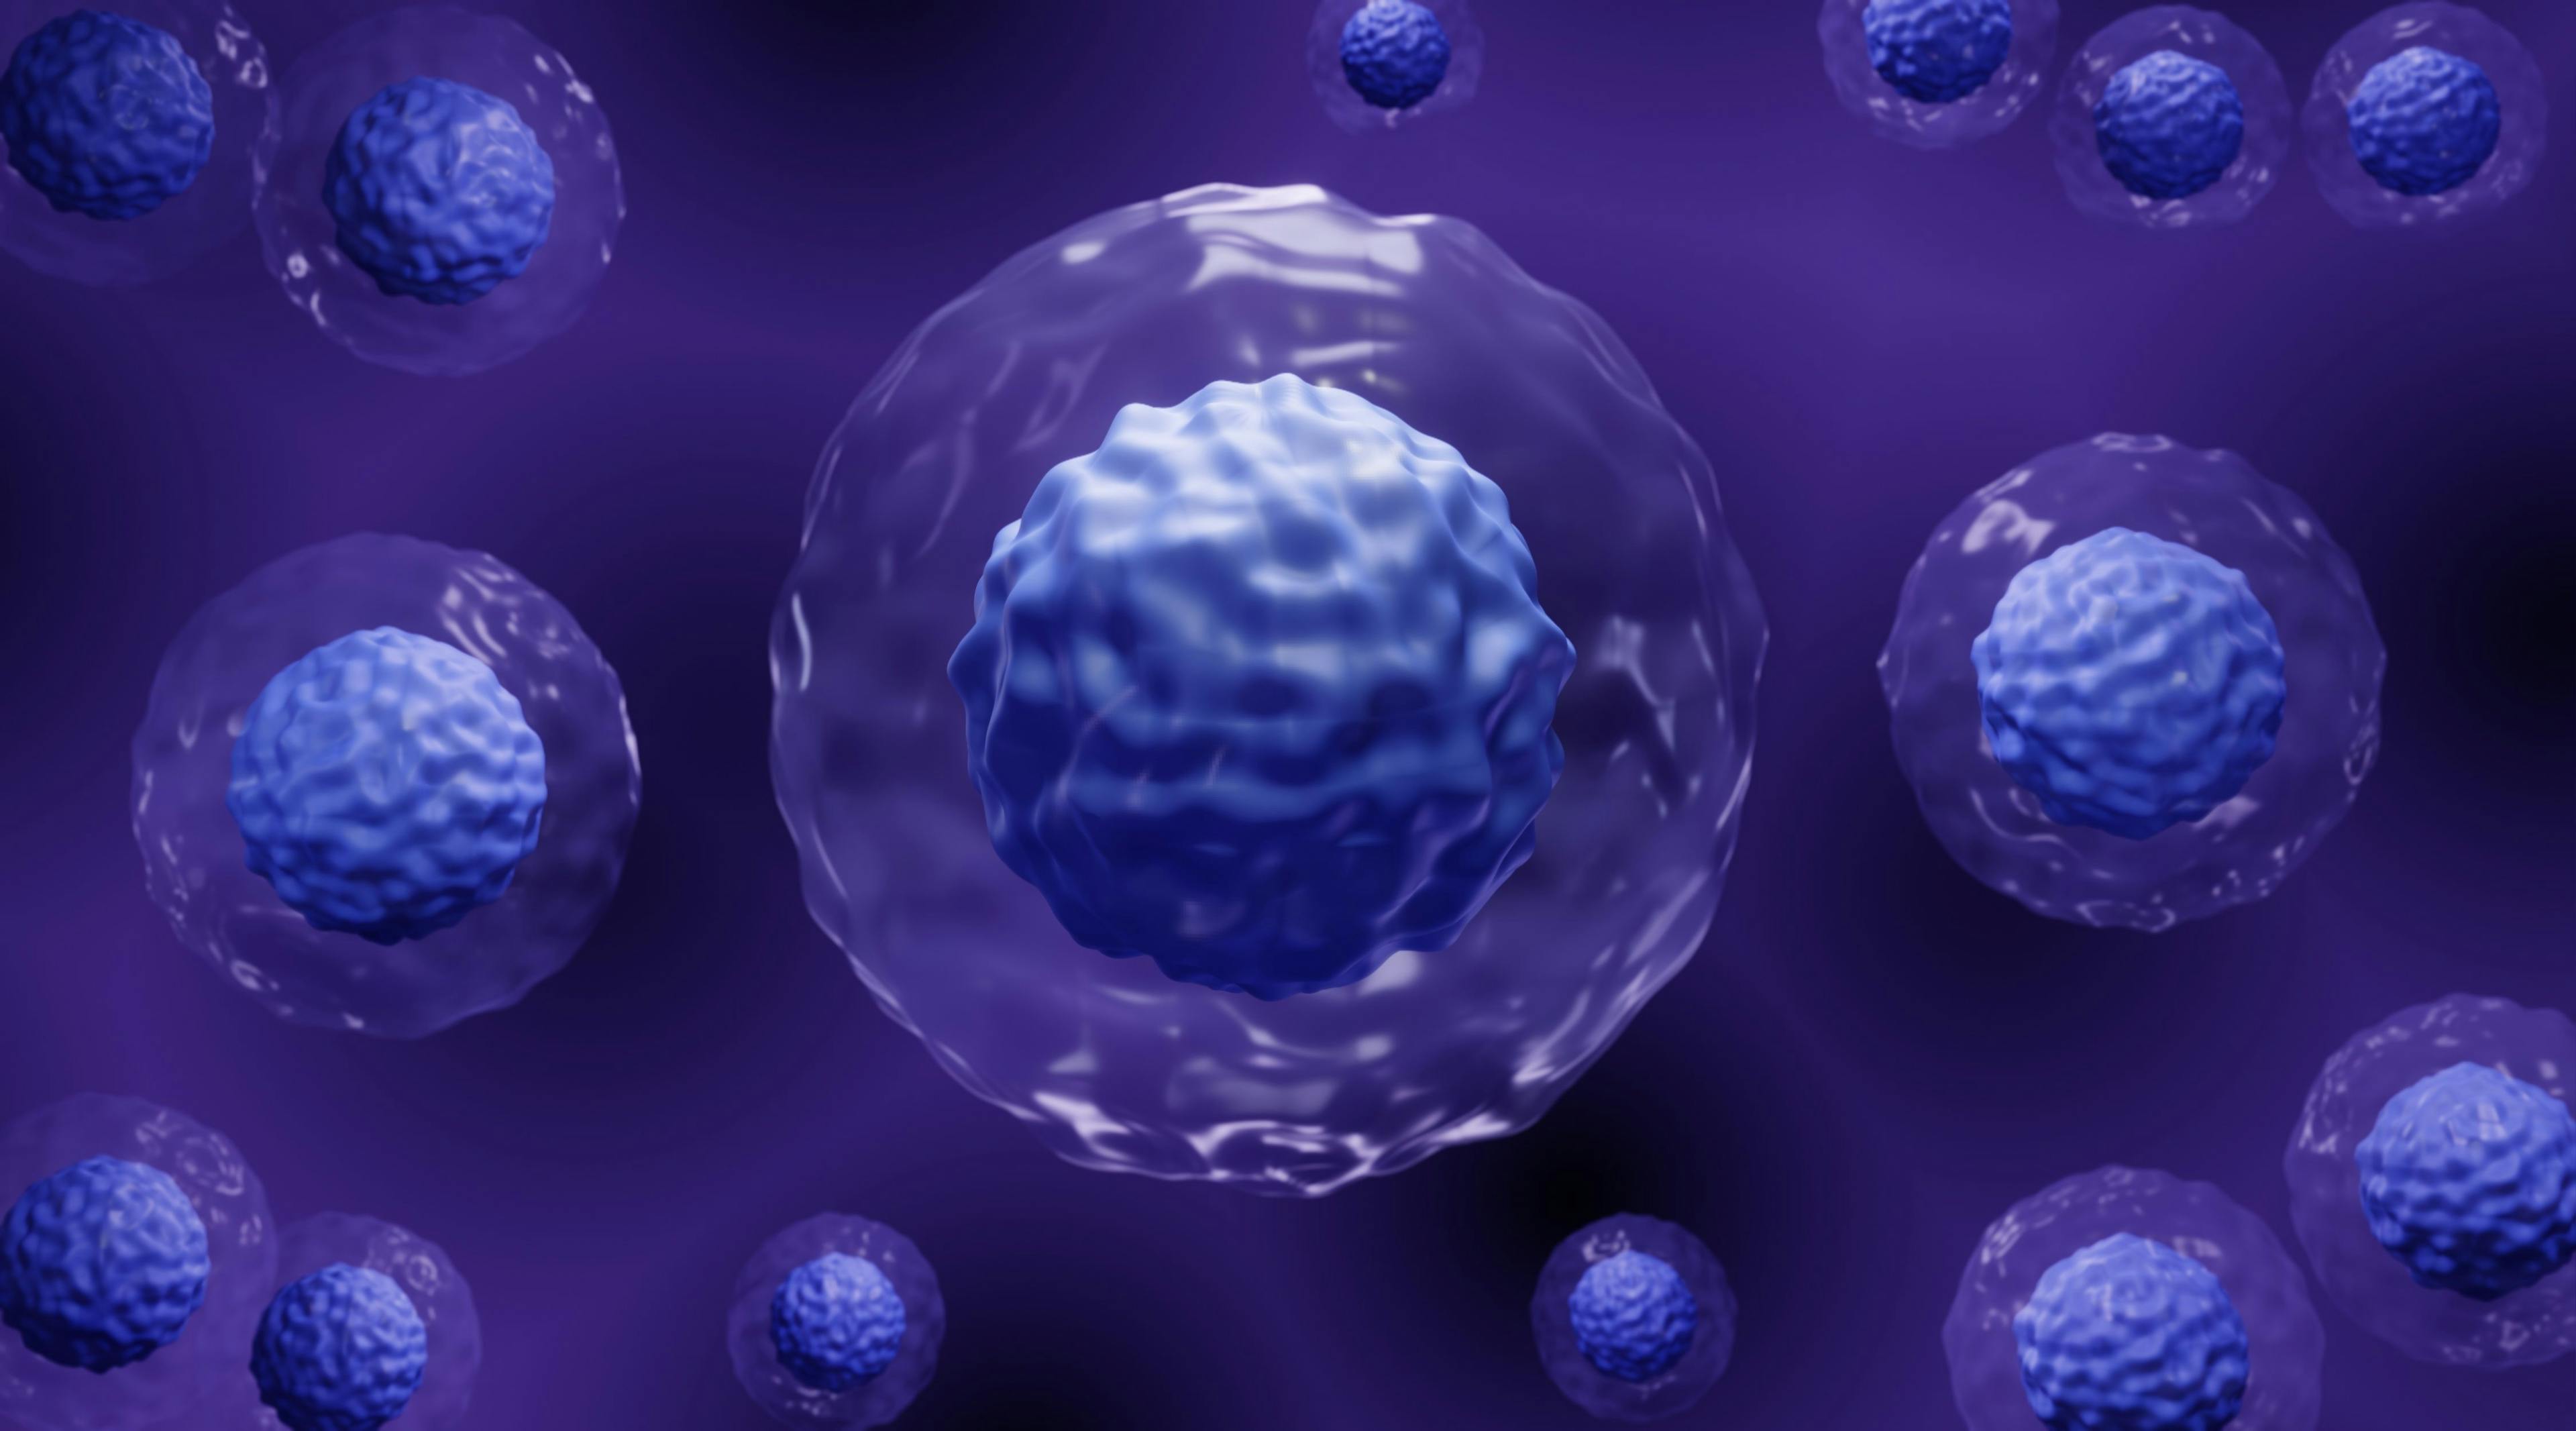 Embryonic stem cells therapy, hematopoietic stem cell transplantation | | Image Credit: © Artur - www.stock.adobe.com